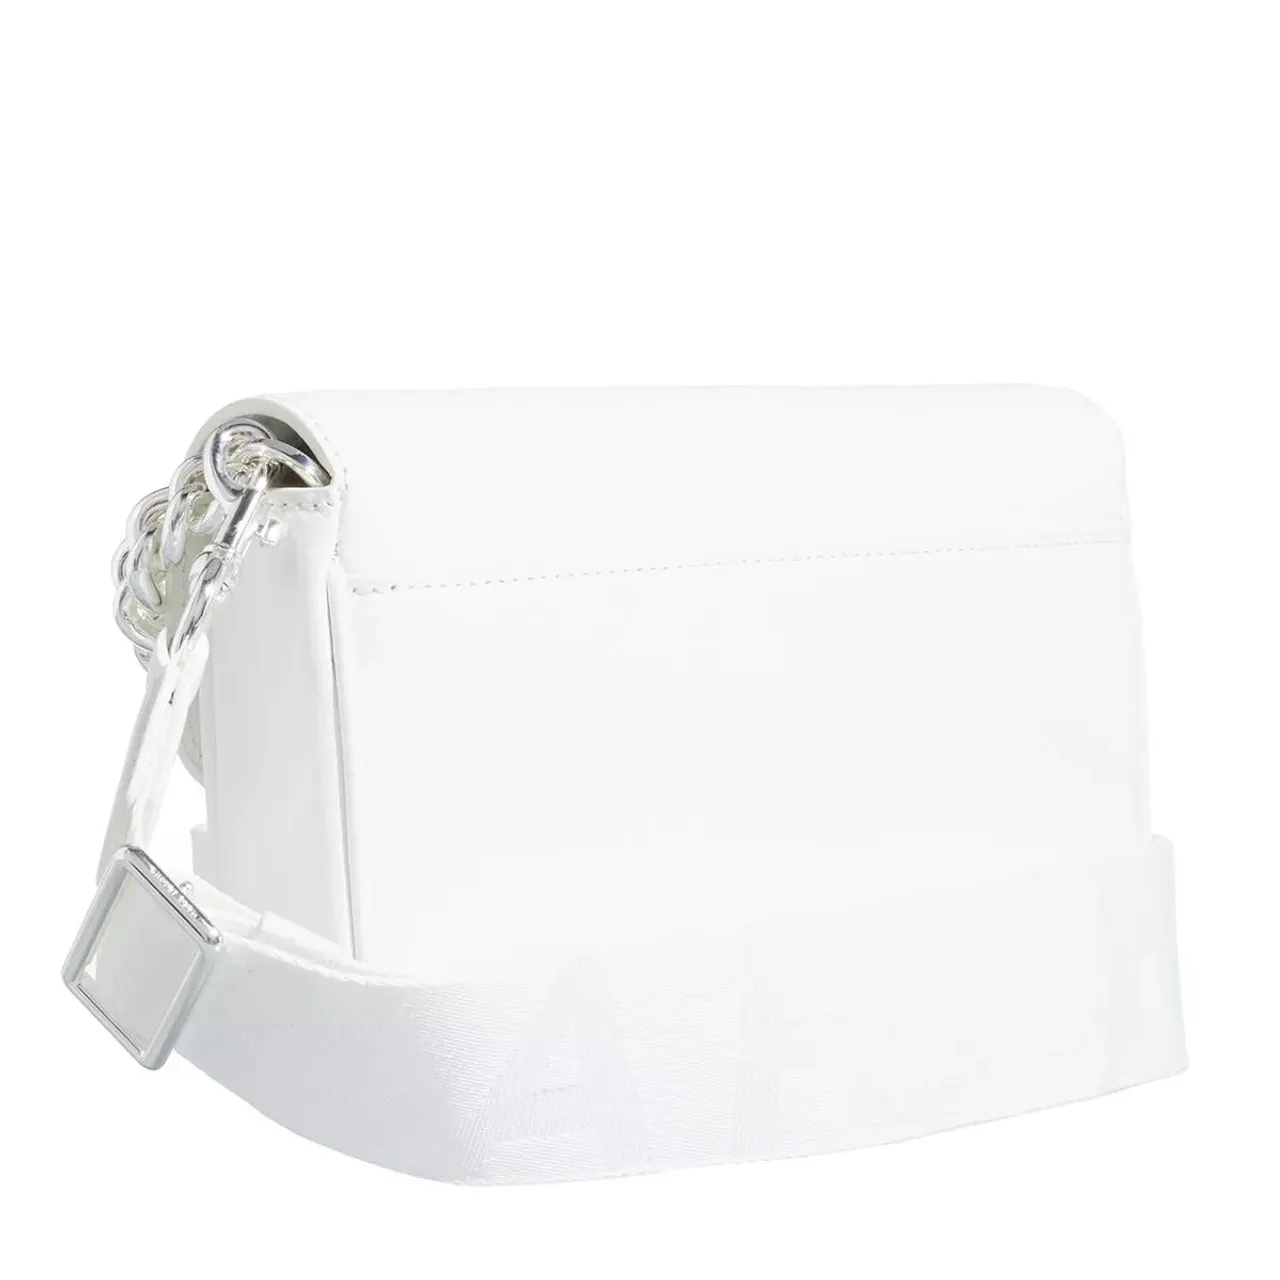 Marc Jacobs Crossbody Bags - The Shoulder Bag - white - Crossbody Bags for ladies